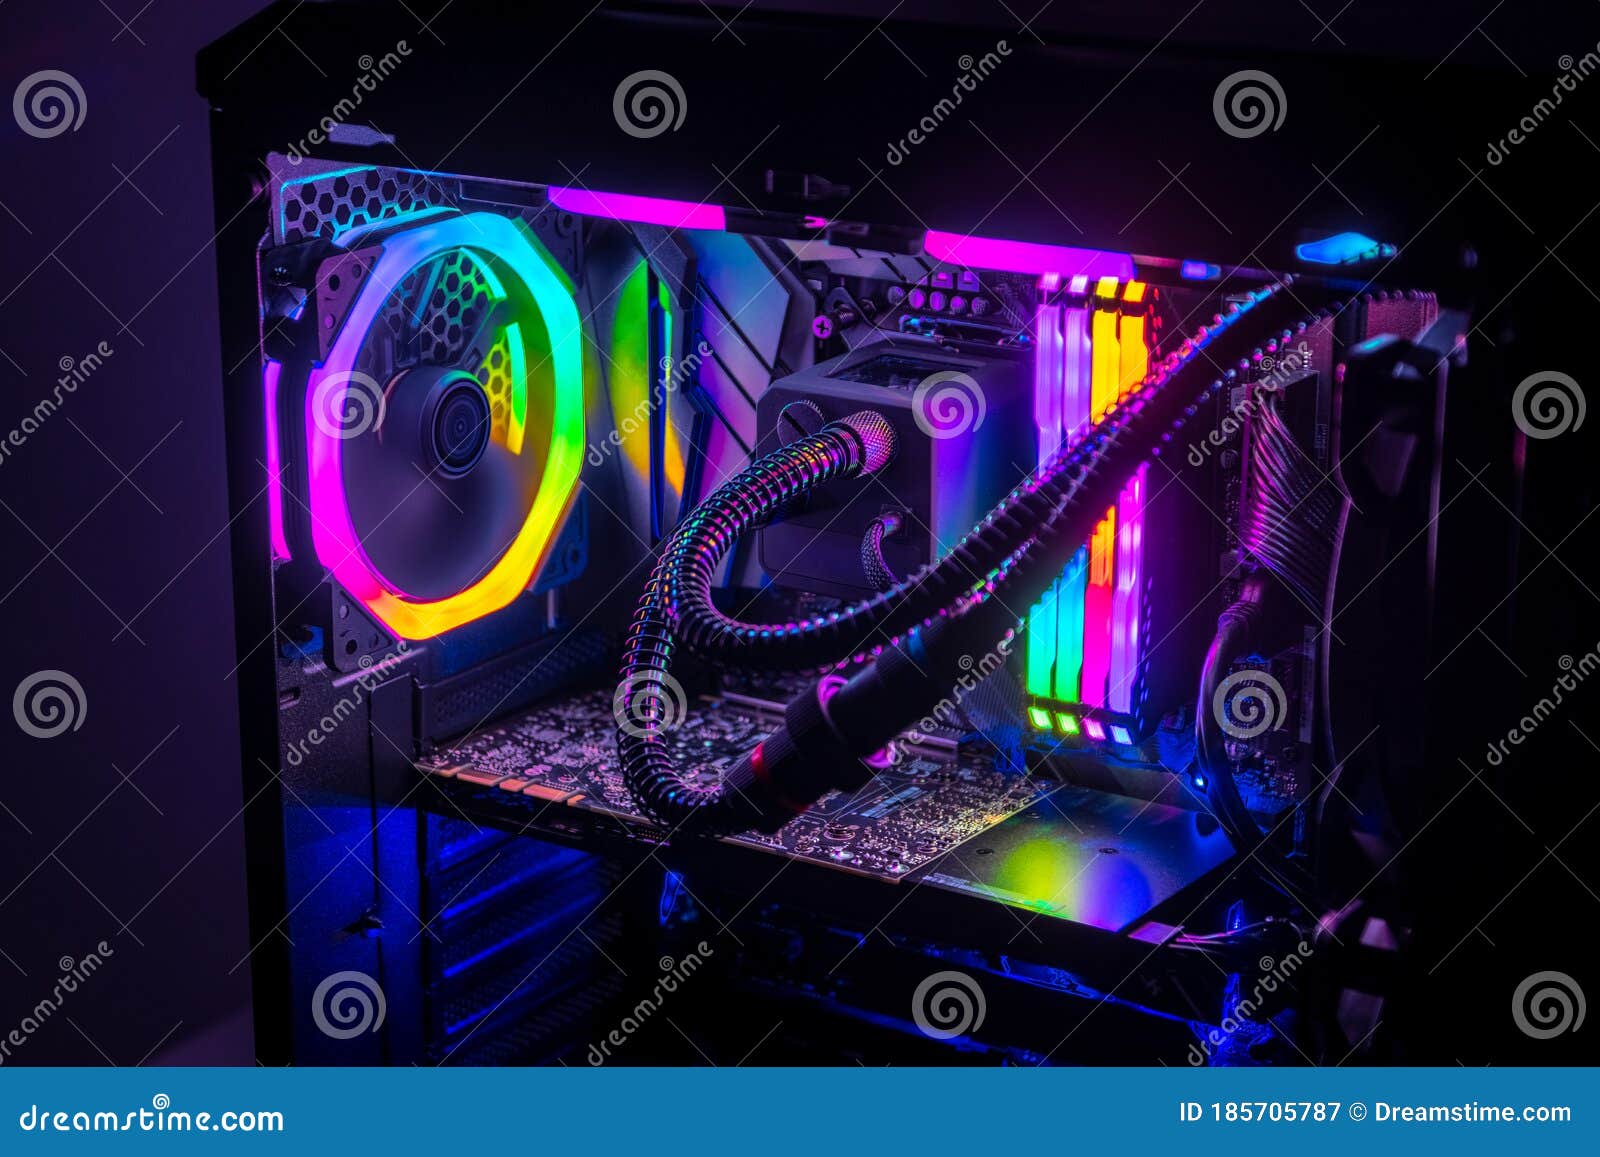 kust boksen honderd Gaming PC with RGB LED Lights on a Computer, Assembled with Hardware  Components Stock Image - Image of lights, case: 185705787